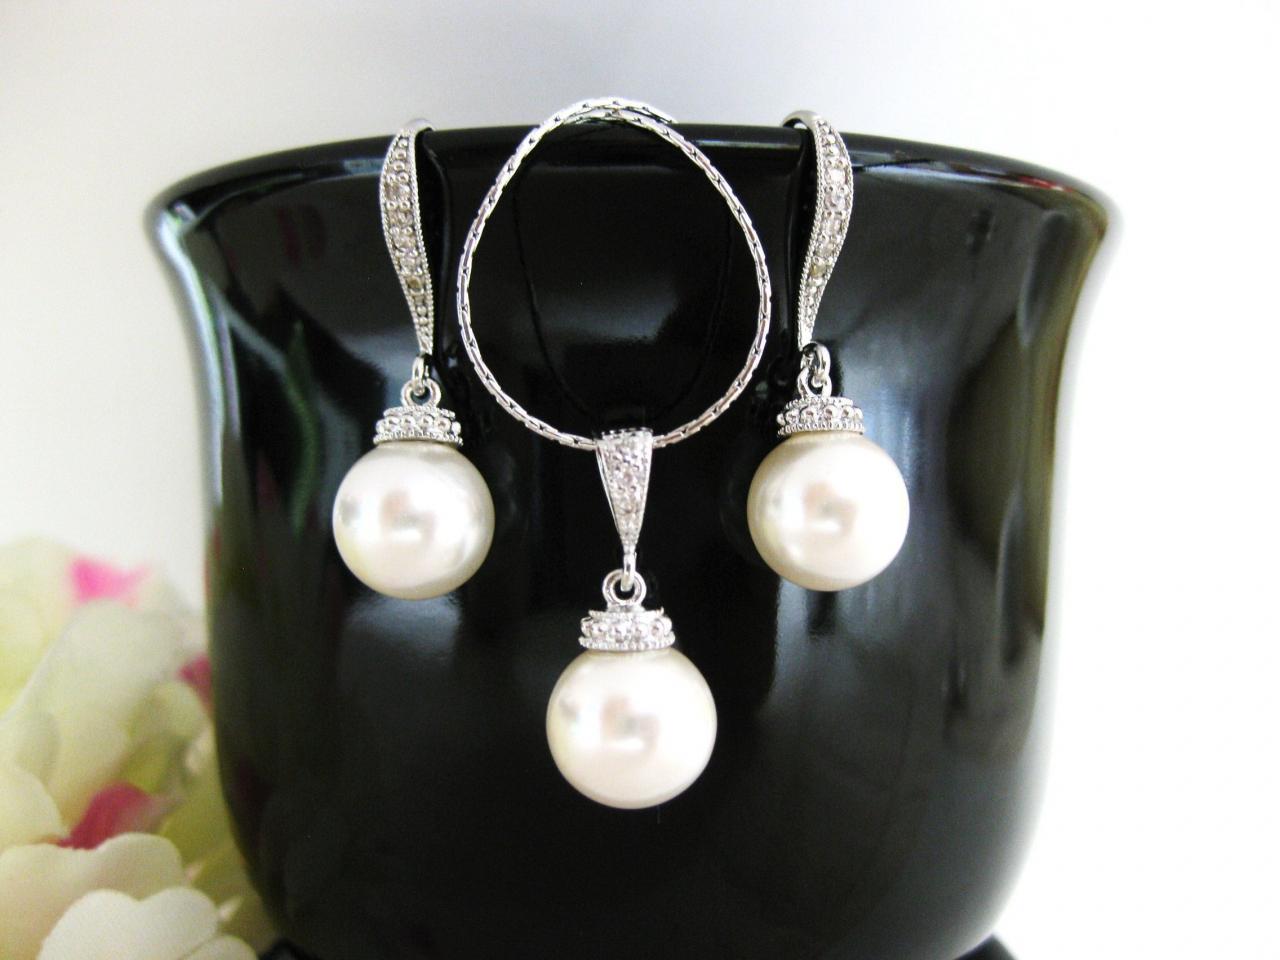 Bridal Pearl Earrings & Necklace Gift Set, Swarovski 10mm Round Pearl, Wedding Bridesmaid Gift, Bridal Party Jewelry (ne030)